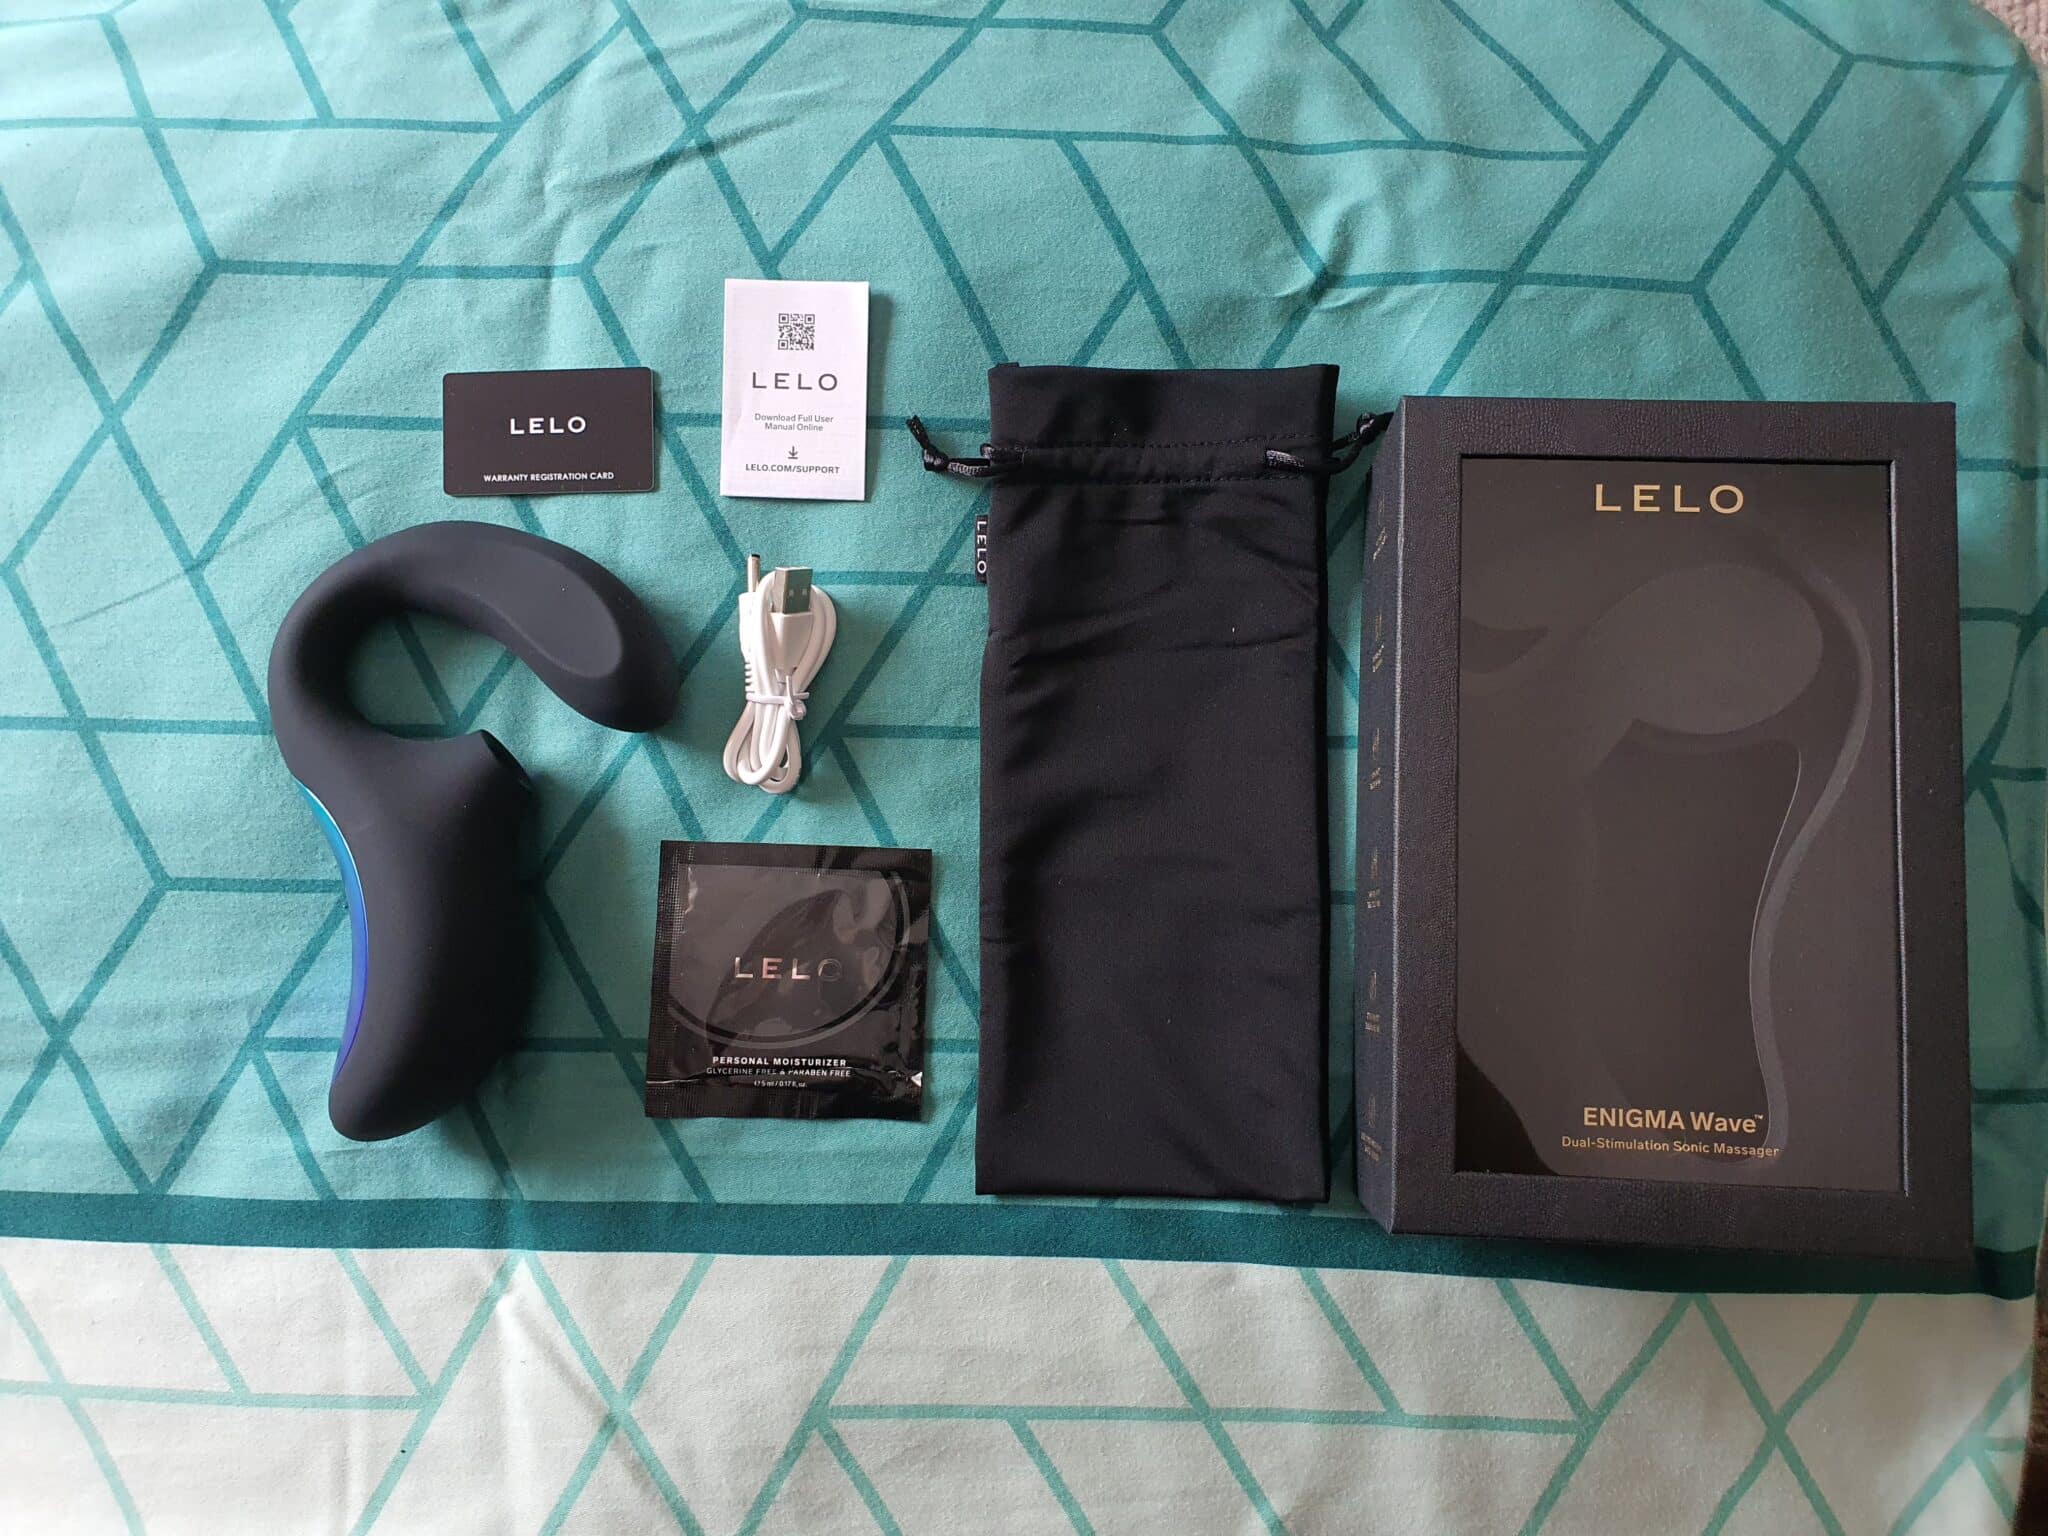 Lelo Enigma Wave Cost of the LELO- ENIGMA Wave